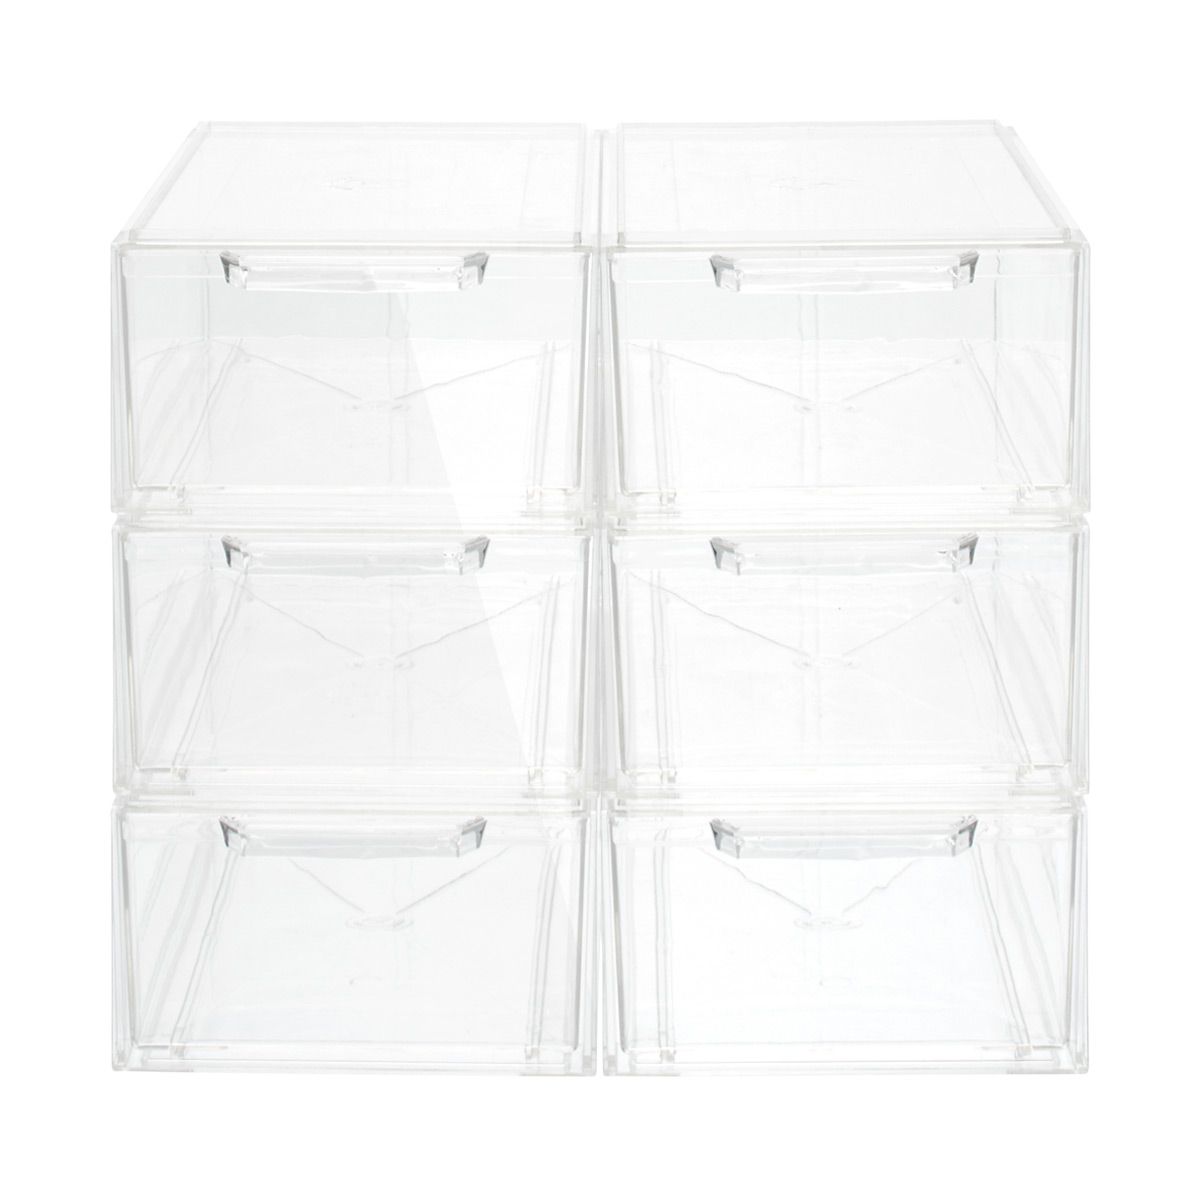 Case of 6 Regular Shoe Drawers | The Container Store